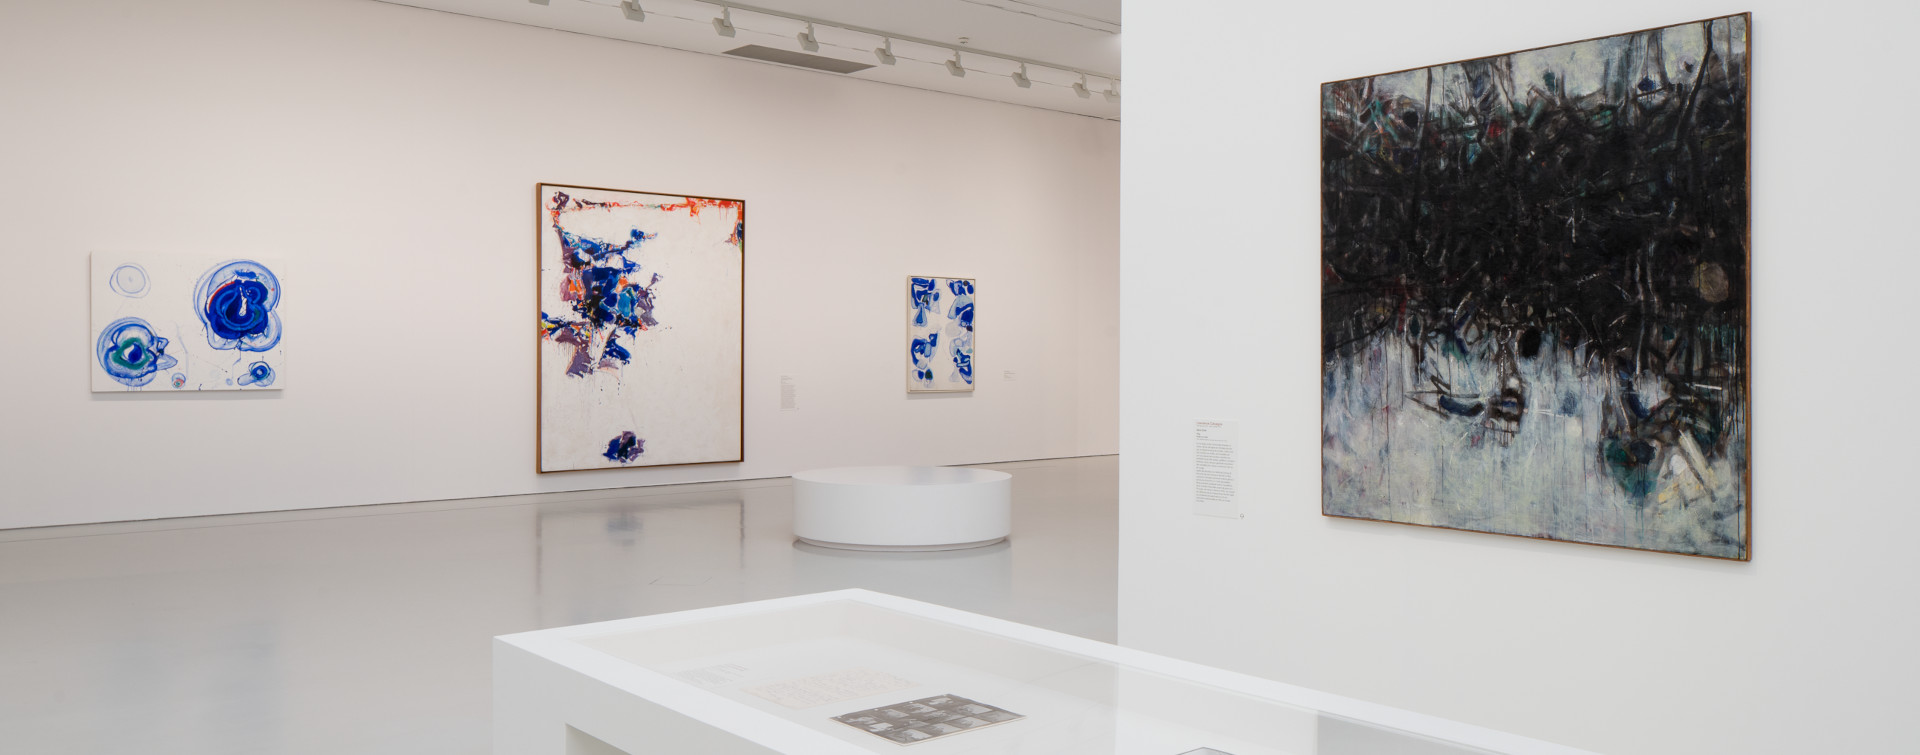 United States of Abstraction : Artistes américains en France (1946-1964)